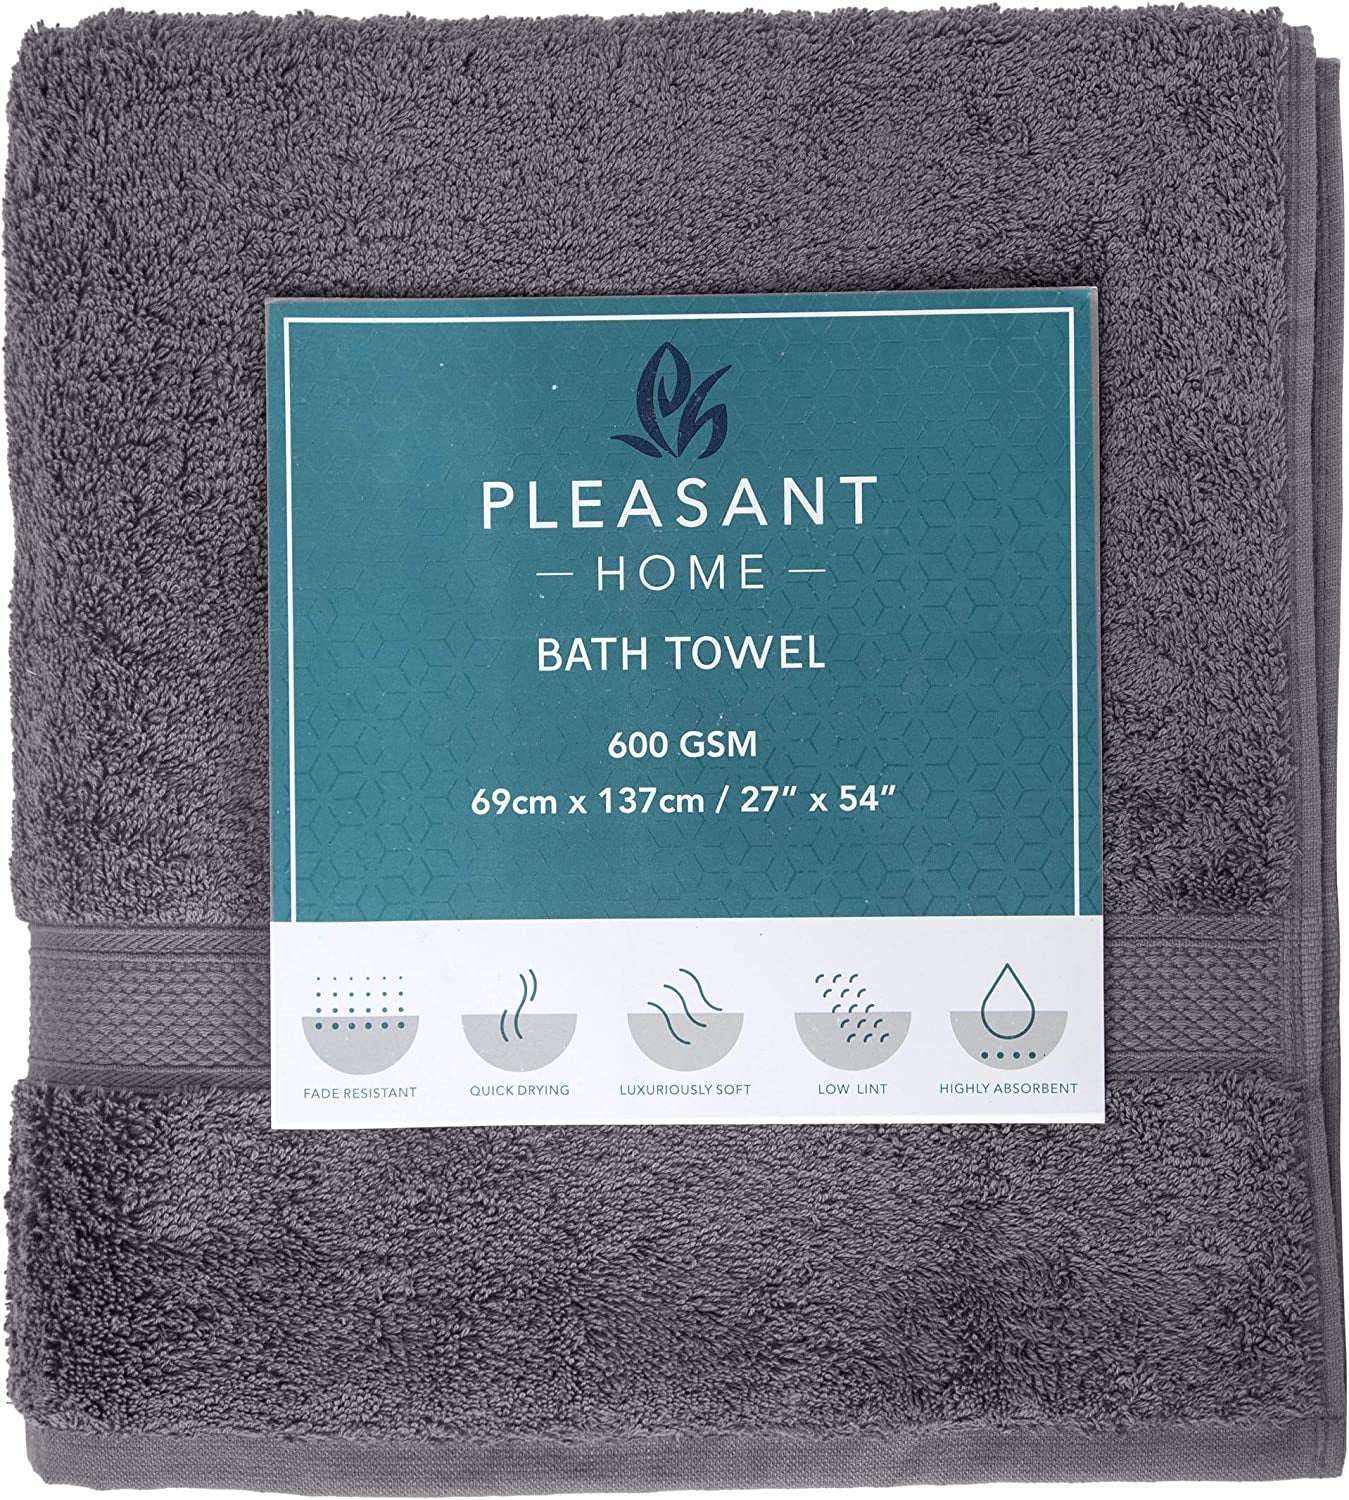 Professional Product Title: "Luxury Bath Towel Set - 100% Cotton, 600 GSM, Soft & Absorbent - Large Size, Hotel Quality - Grey (4 Pack)"